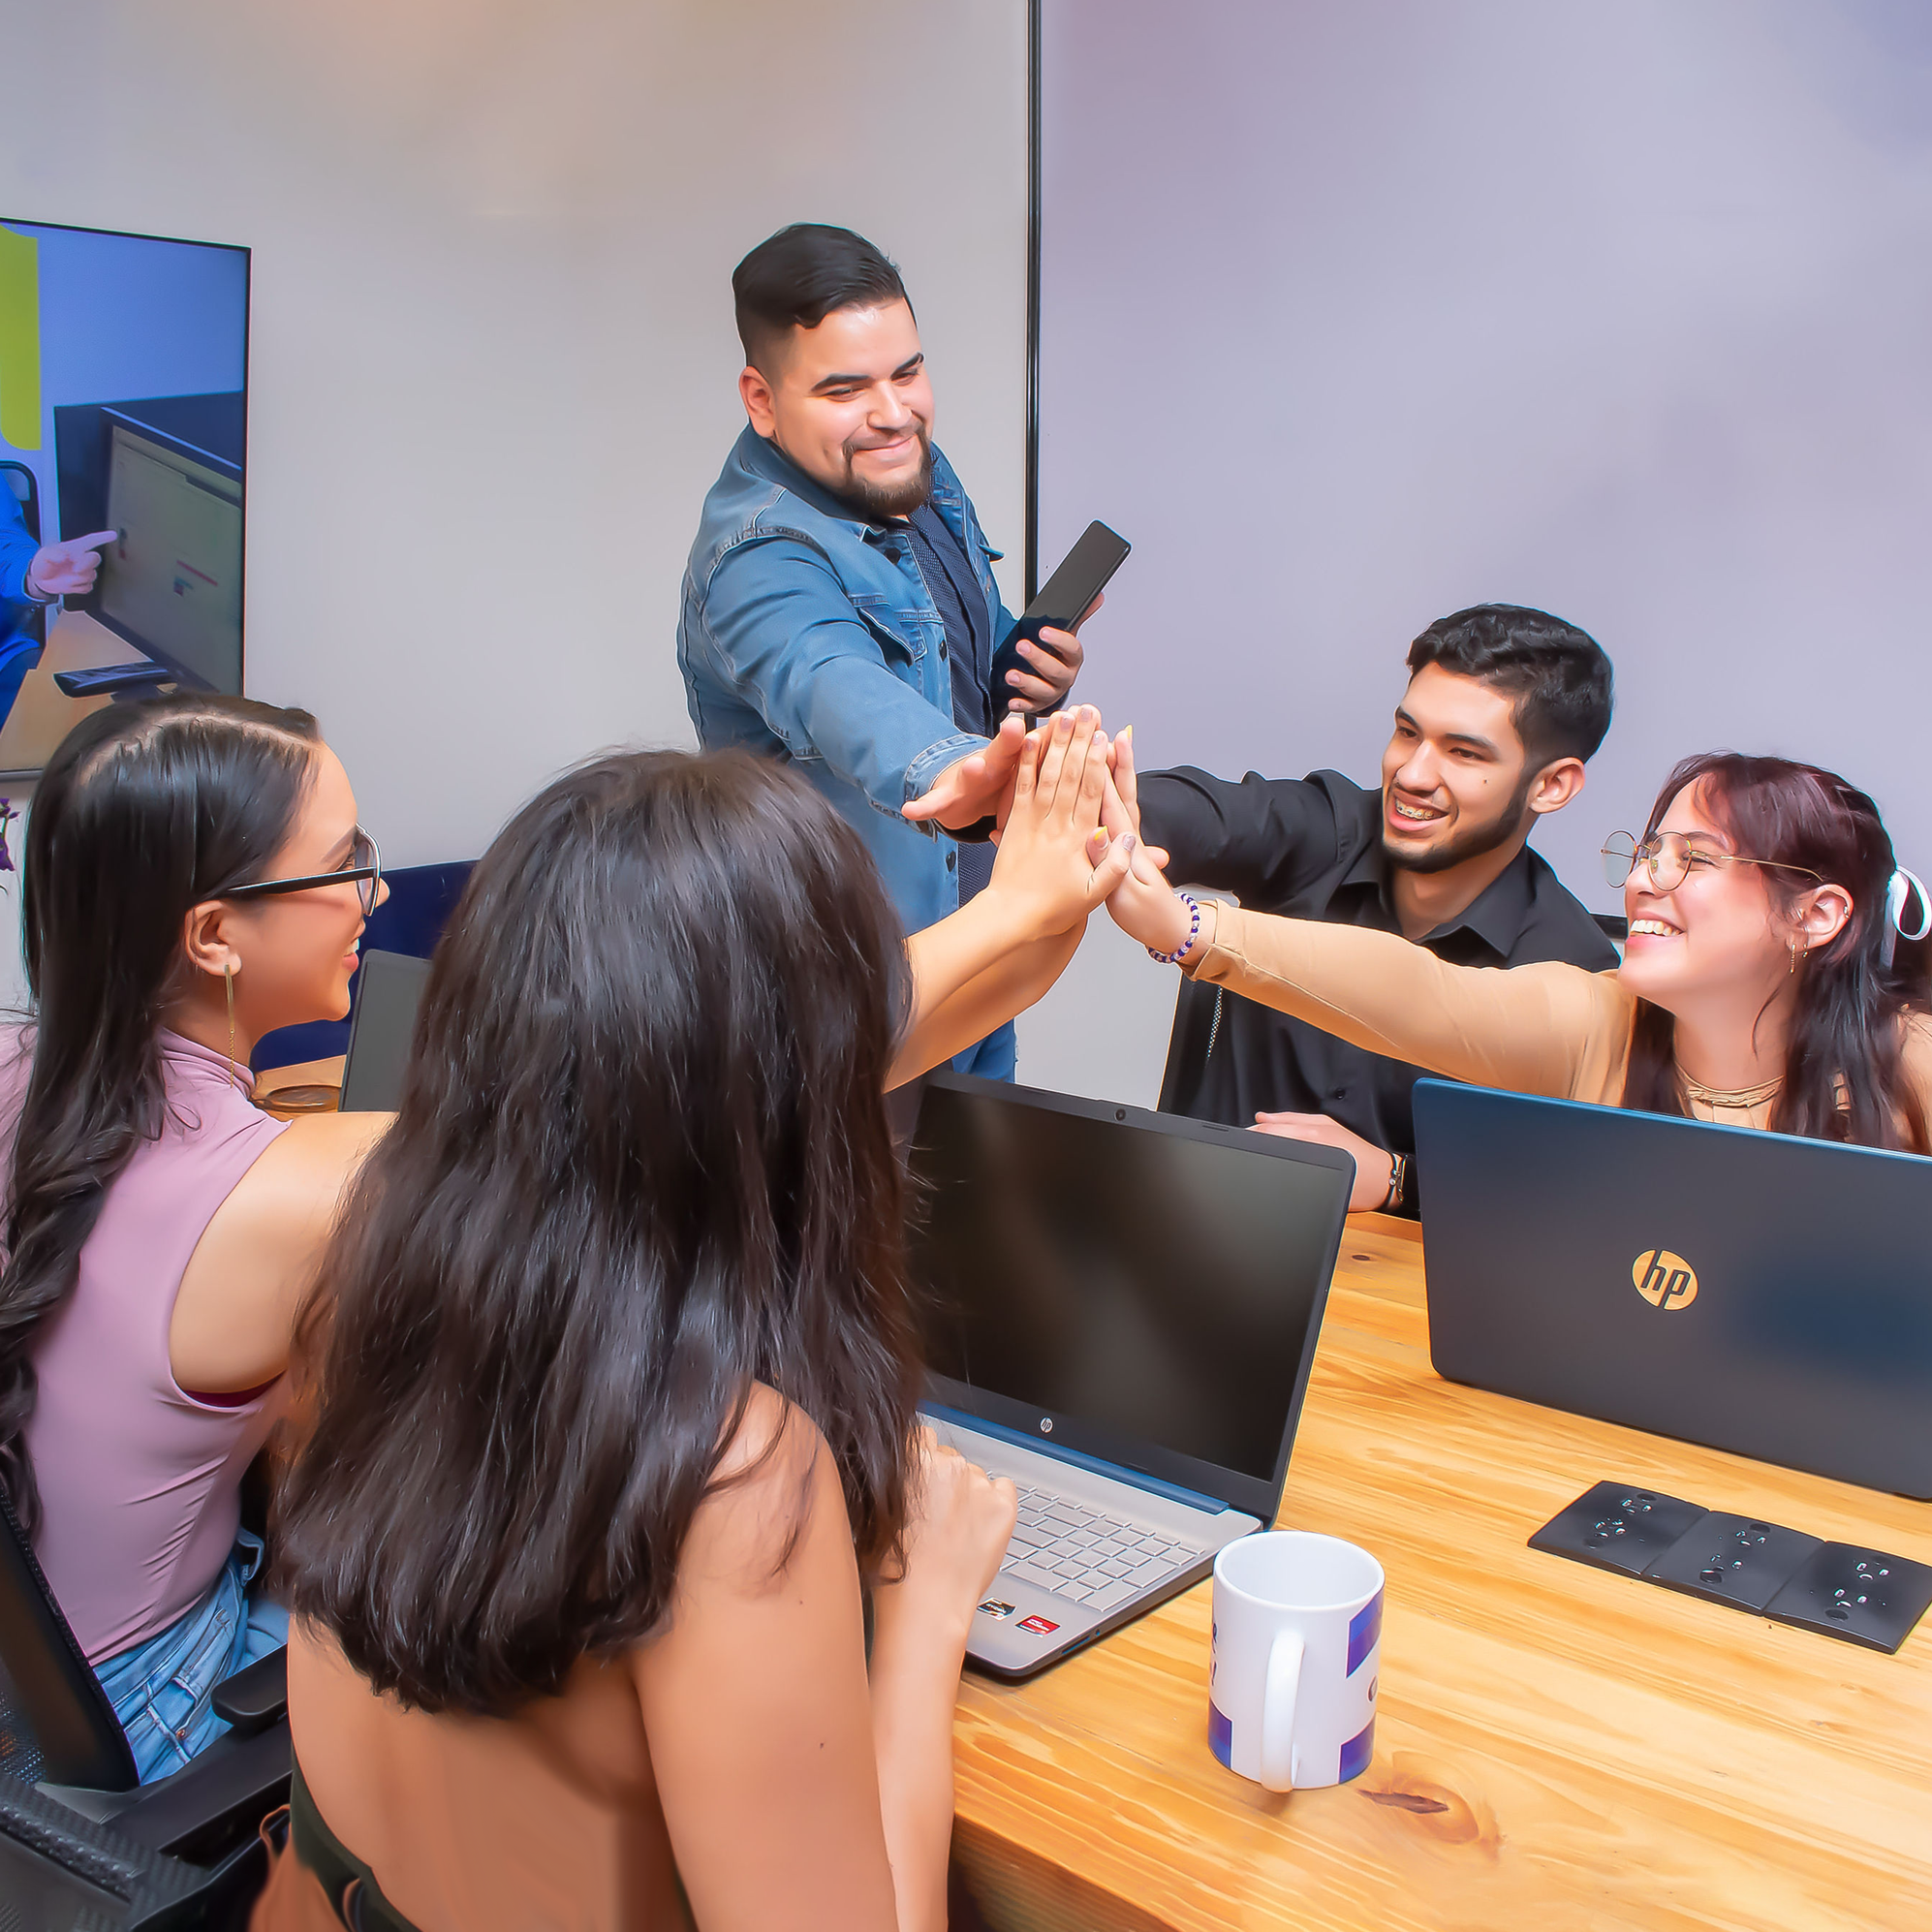 A group of freelancers smiling and interacting with each other